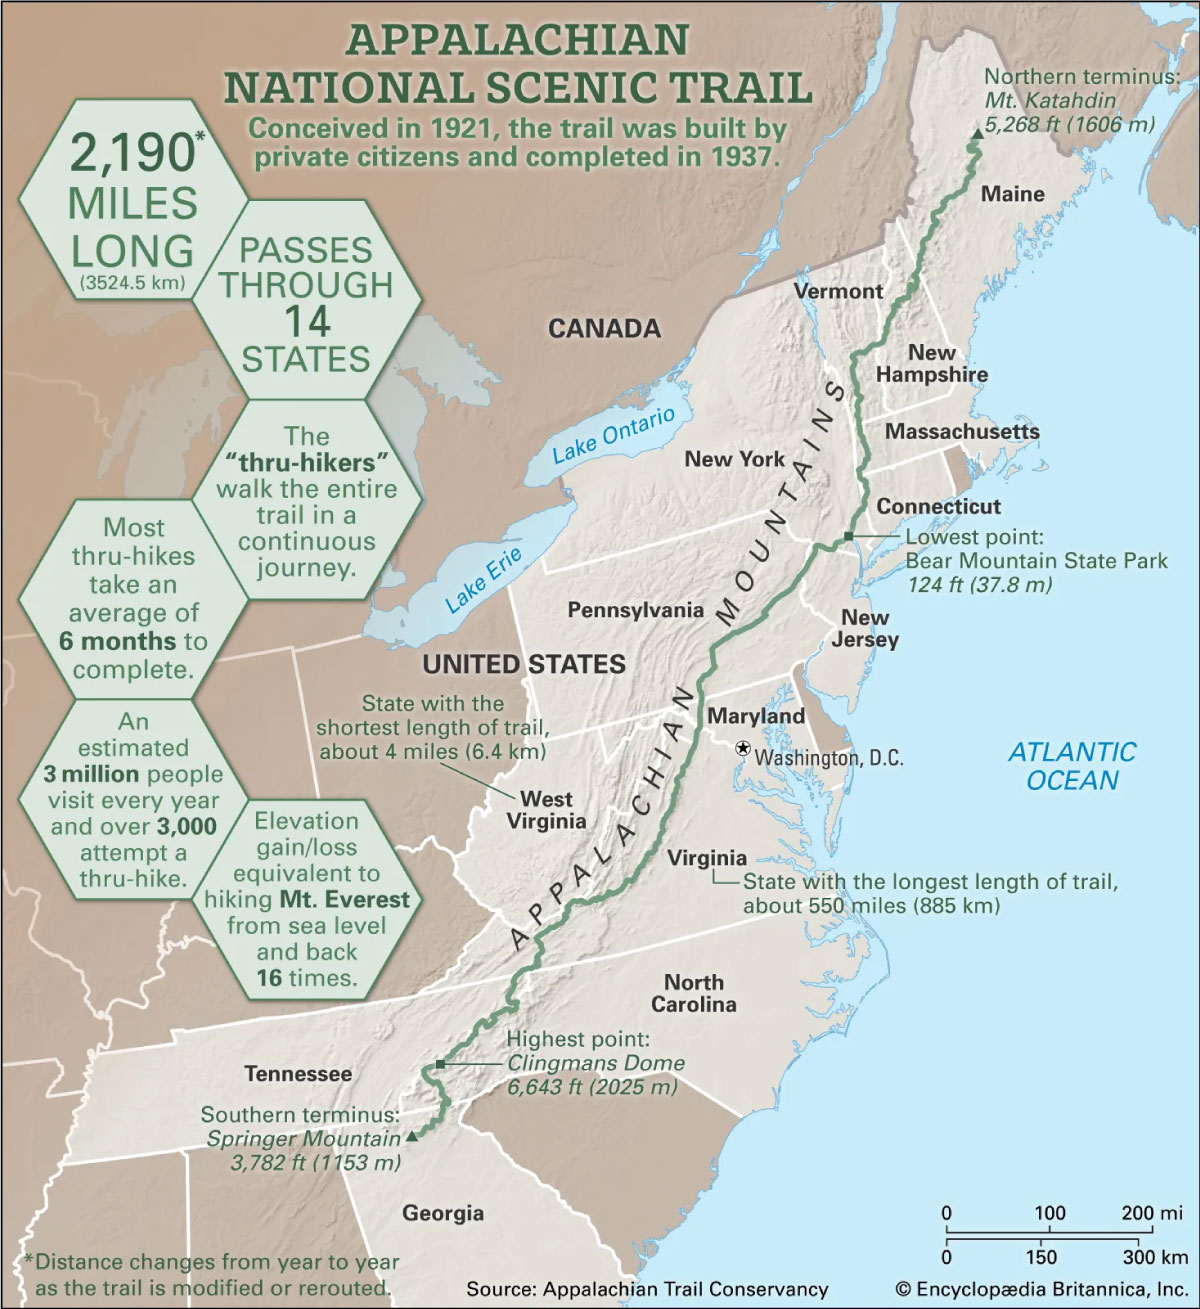 Notable details of the Appalachian National Scenic Trail